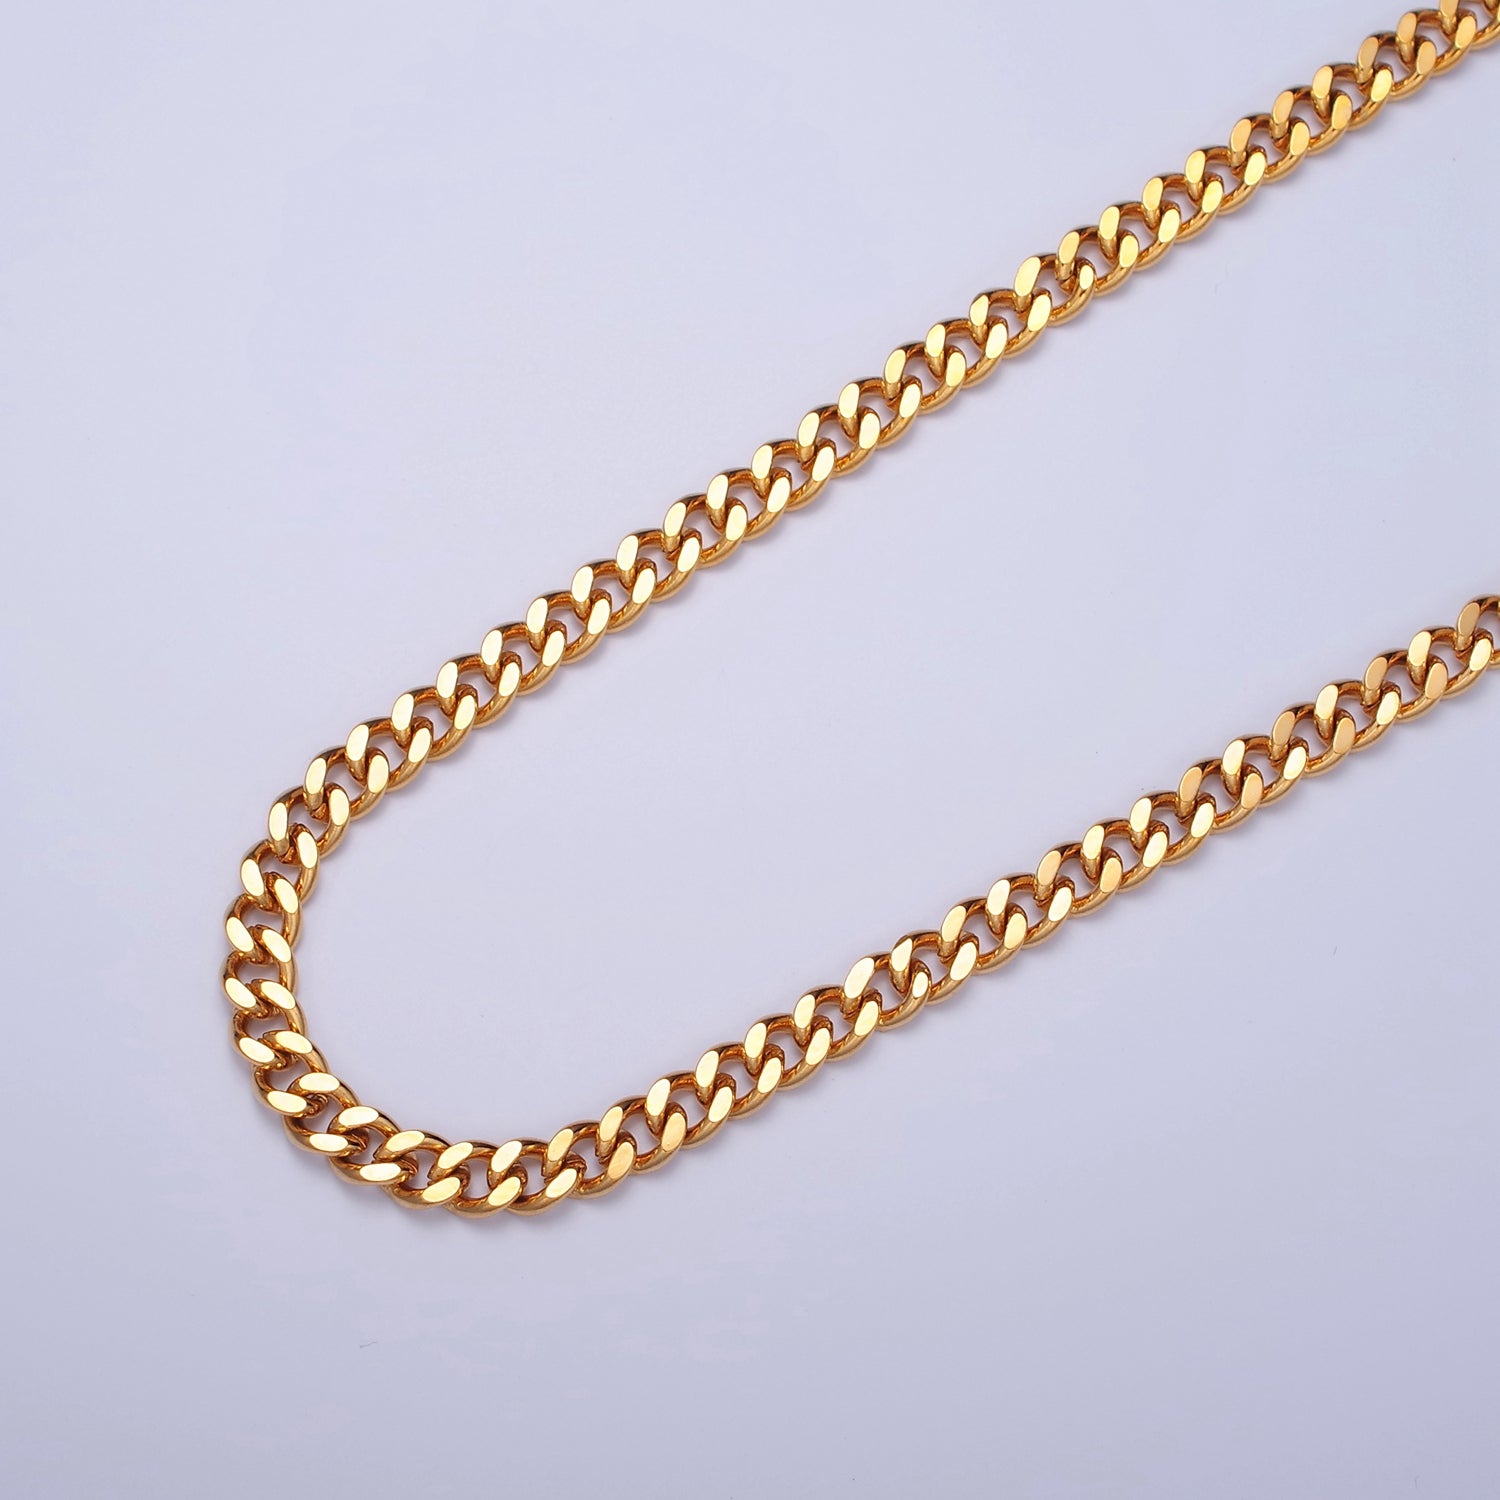 Miami Cuban Curb Link Unfinished Chain, 4.5mm 24k Gold Filled Chain 19.5 inch long V-032 - DLUXCA